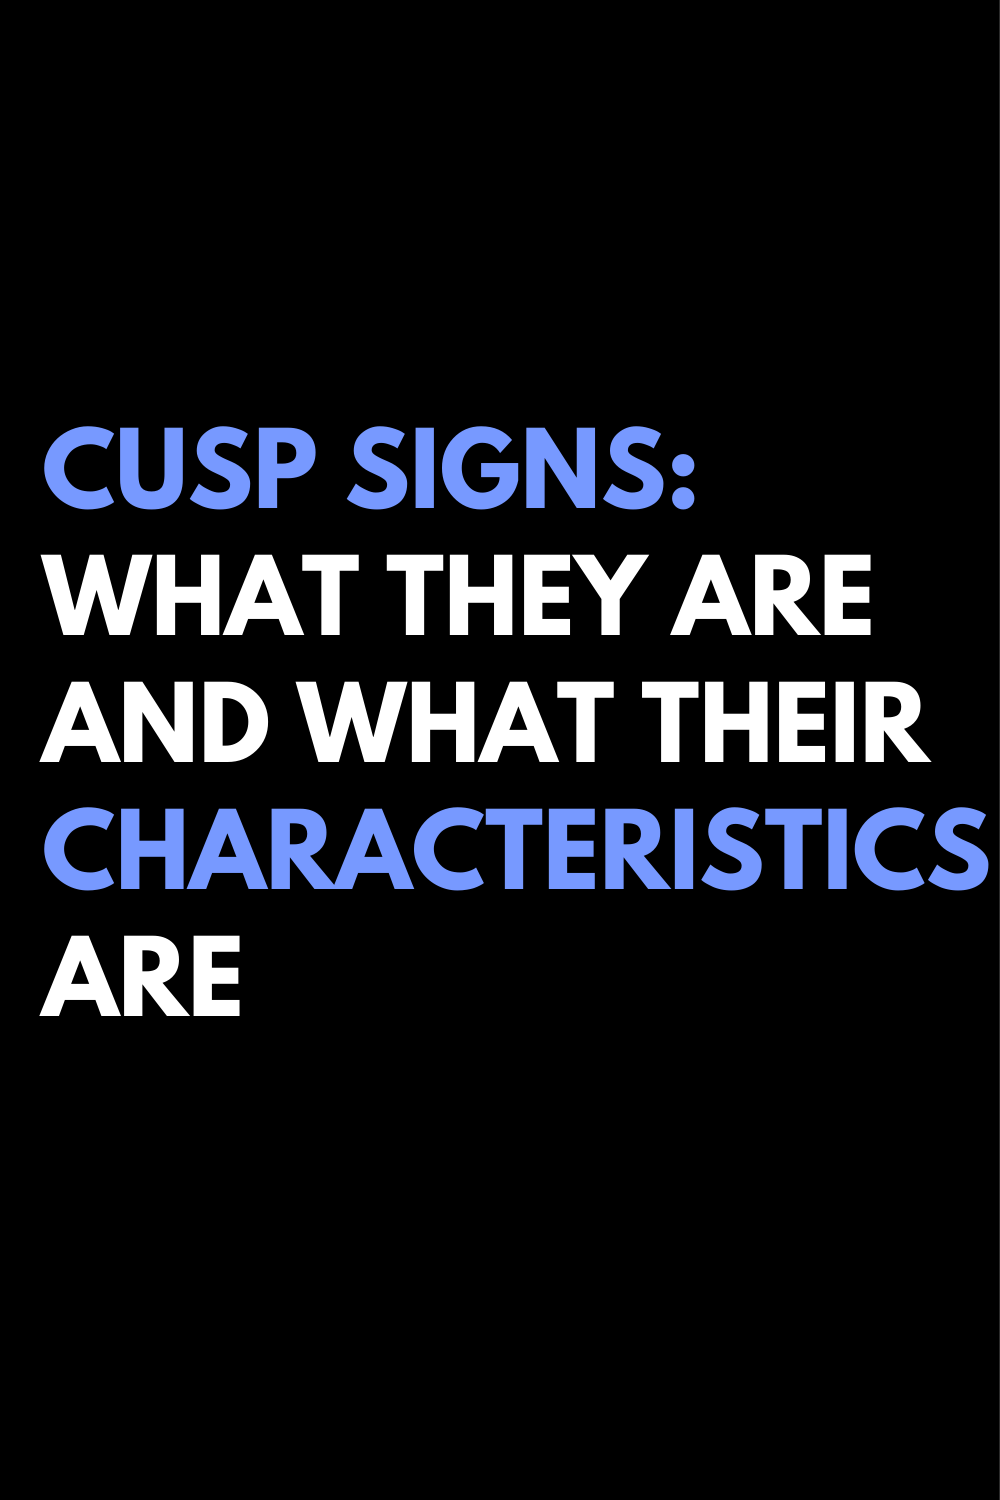 Cusp signs: what they are and what their characteristics are